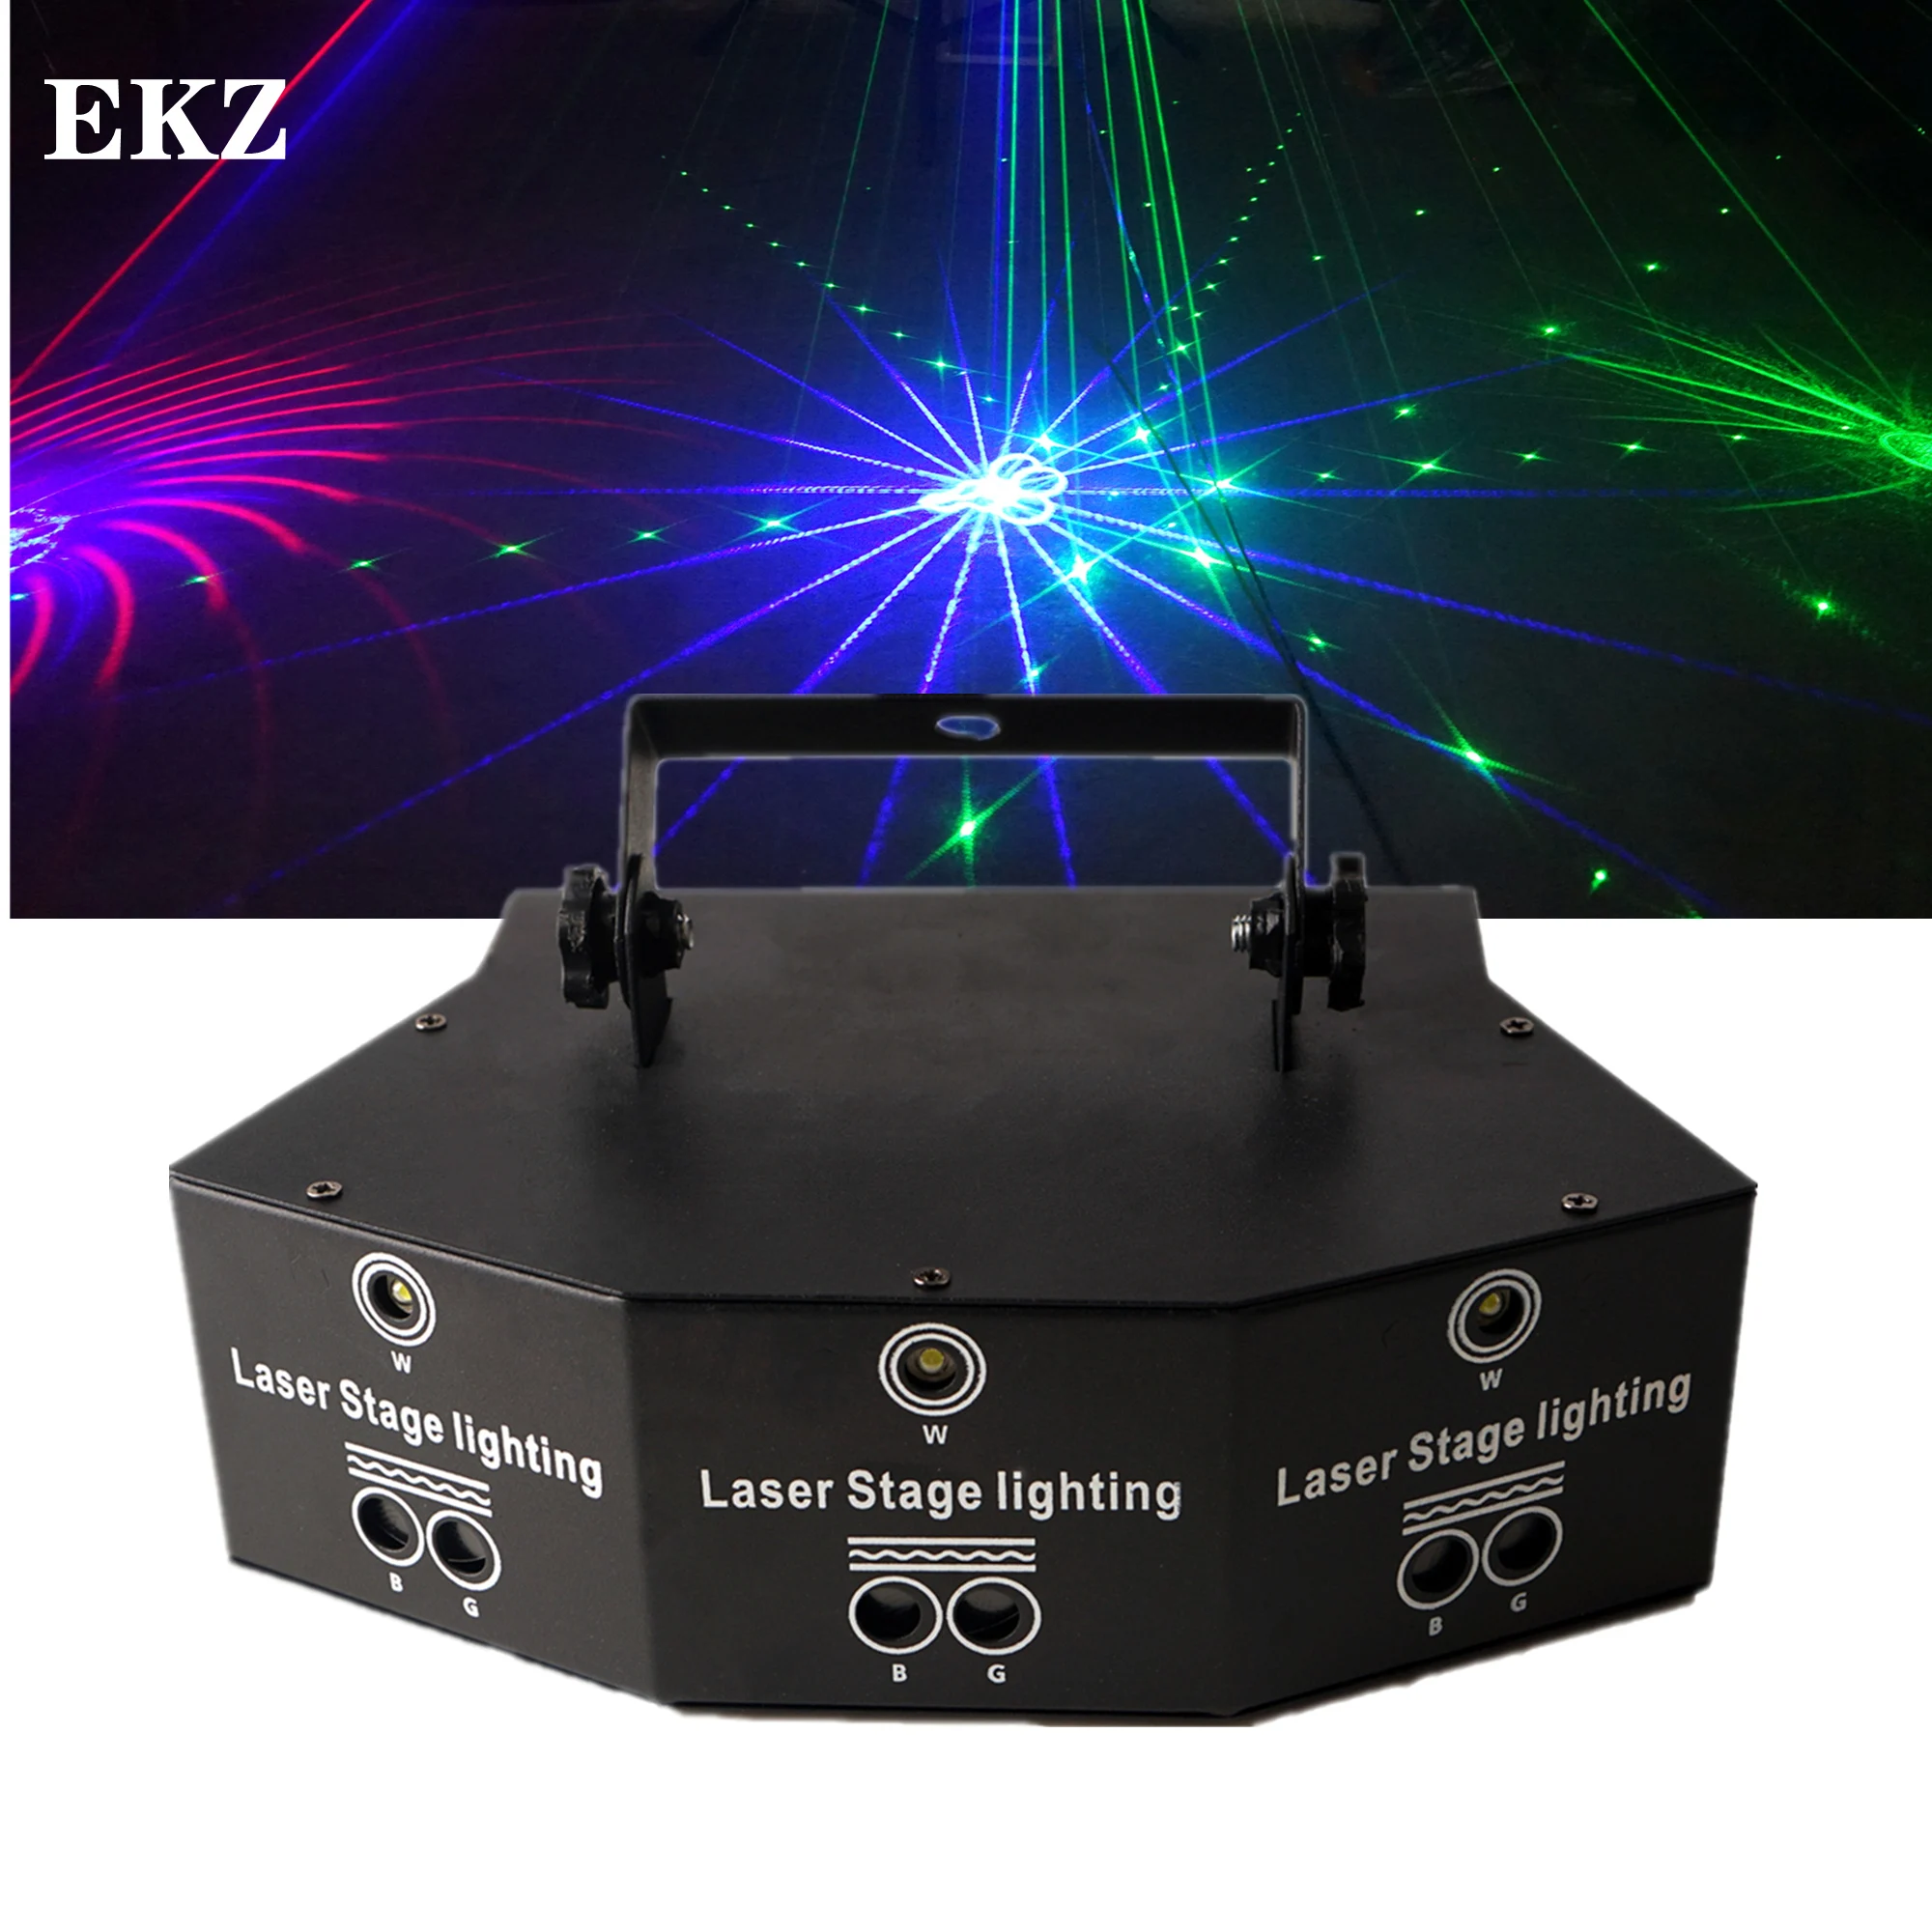 Fast delivery-9 eyes RGB disco DJ laser projector, DMX remote control strobe stage lighting effects, Halloween party Christmas l